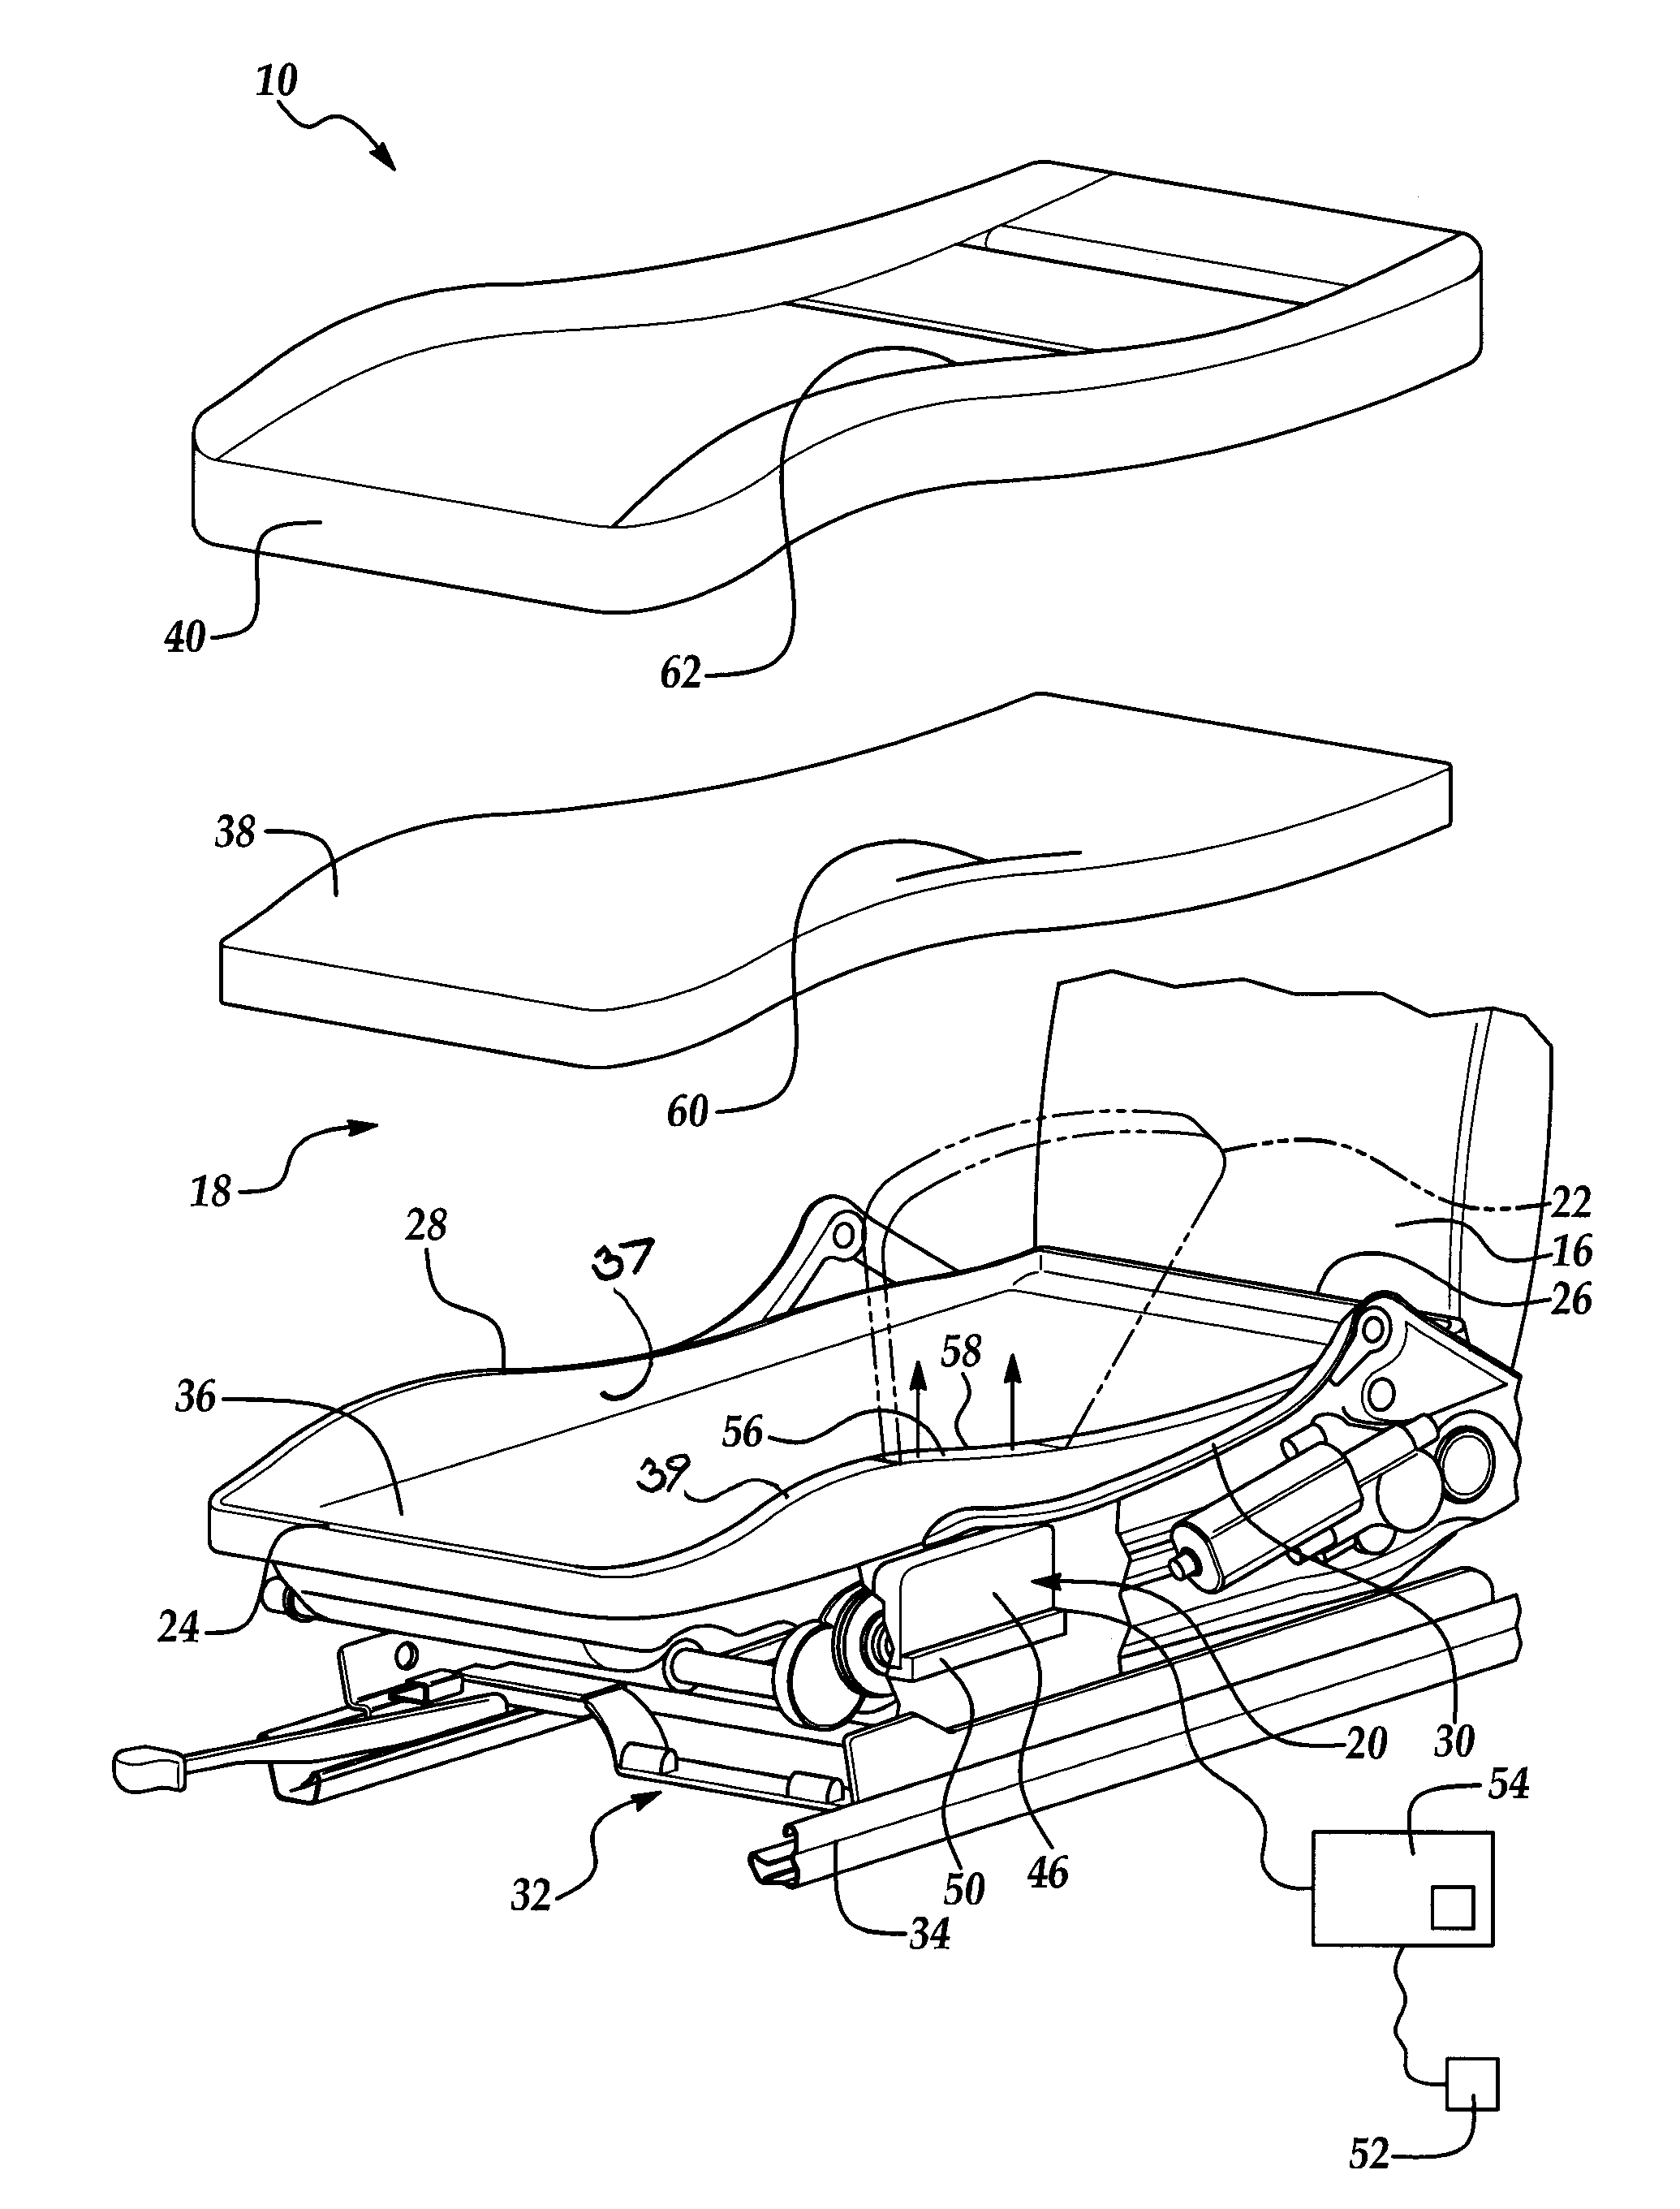 Inflatable airbag system for vehicle seat assembly